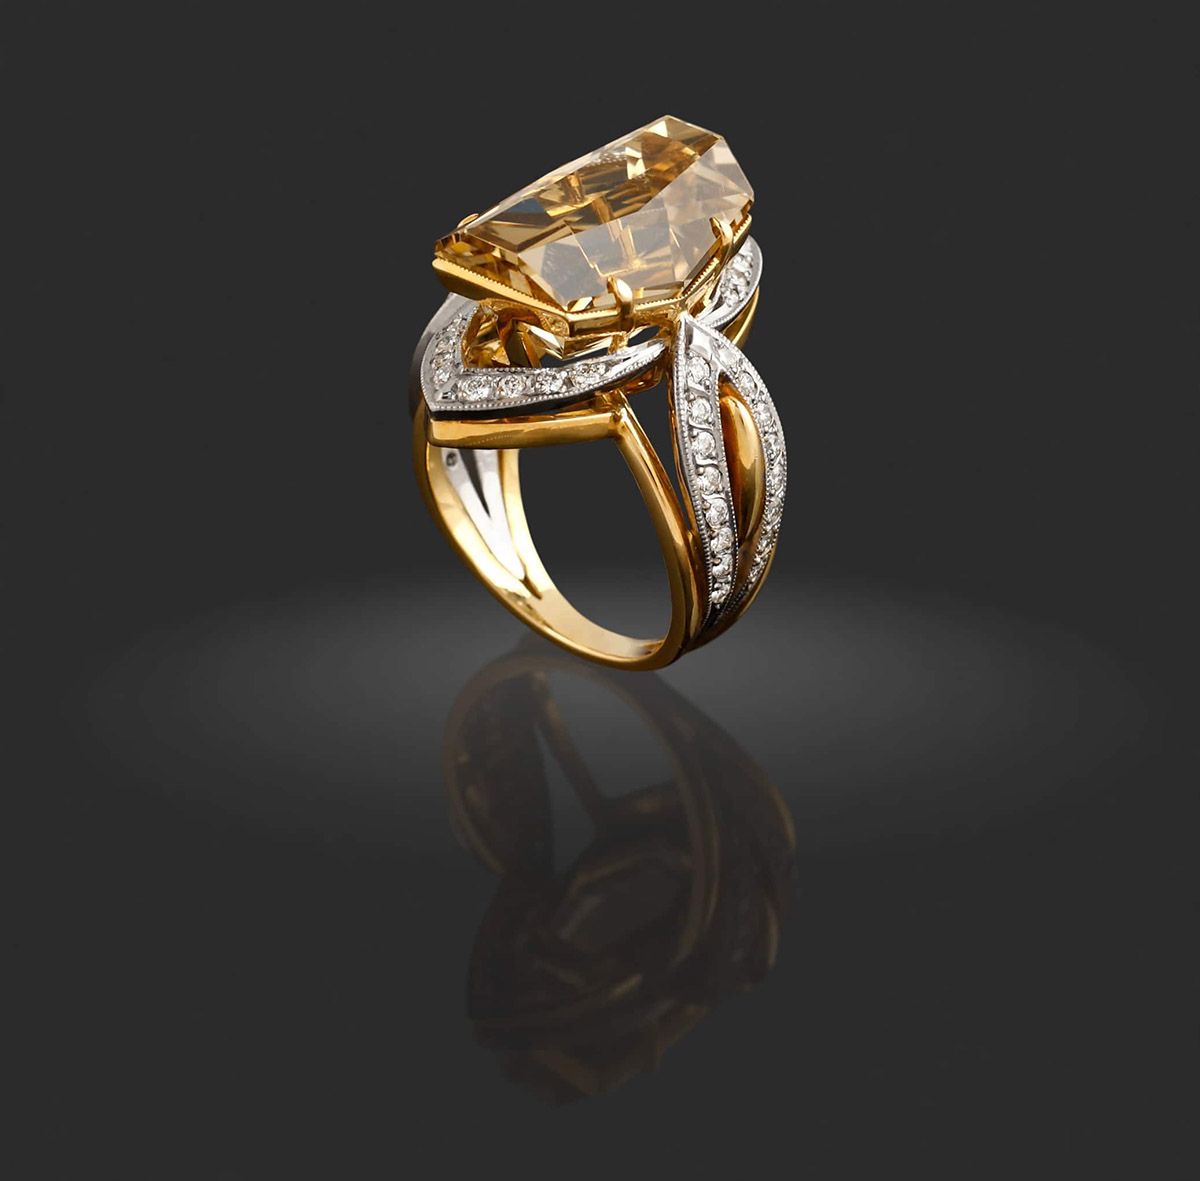 A close up of a gold ring